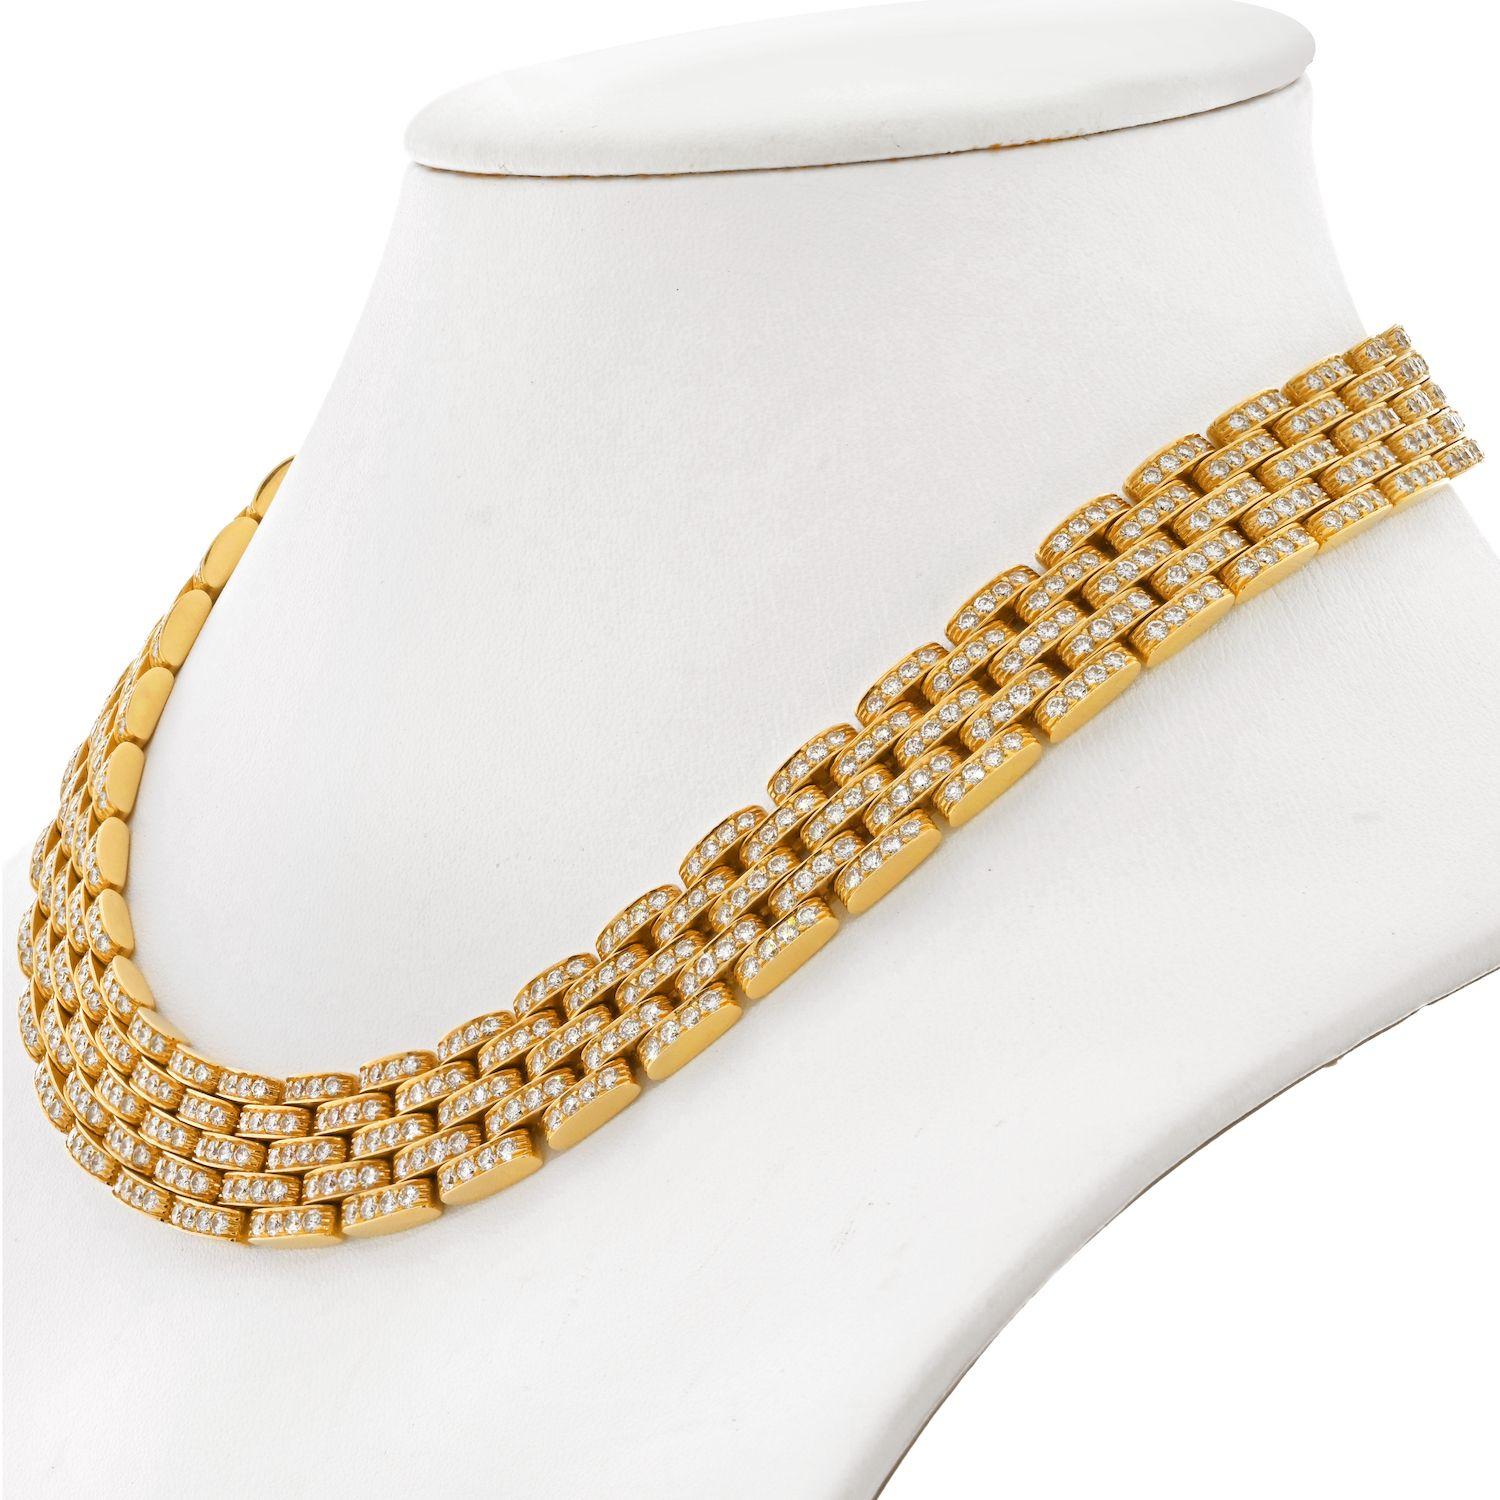 Exceptional Cartier necklace that is perfect for day to night wearing. From the Maillon collection. Five rows of diamond set links composed into a timeless collar necklace. 
This collection is named after the panther, Cartier's iconic mascot. The